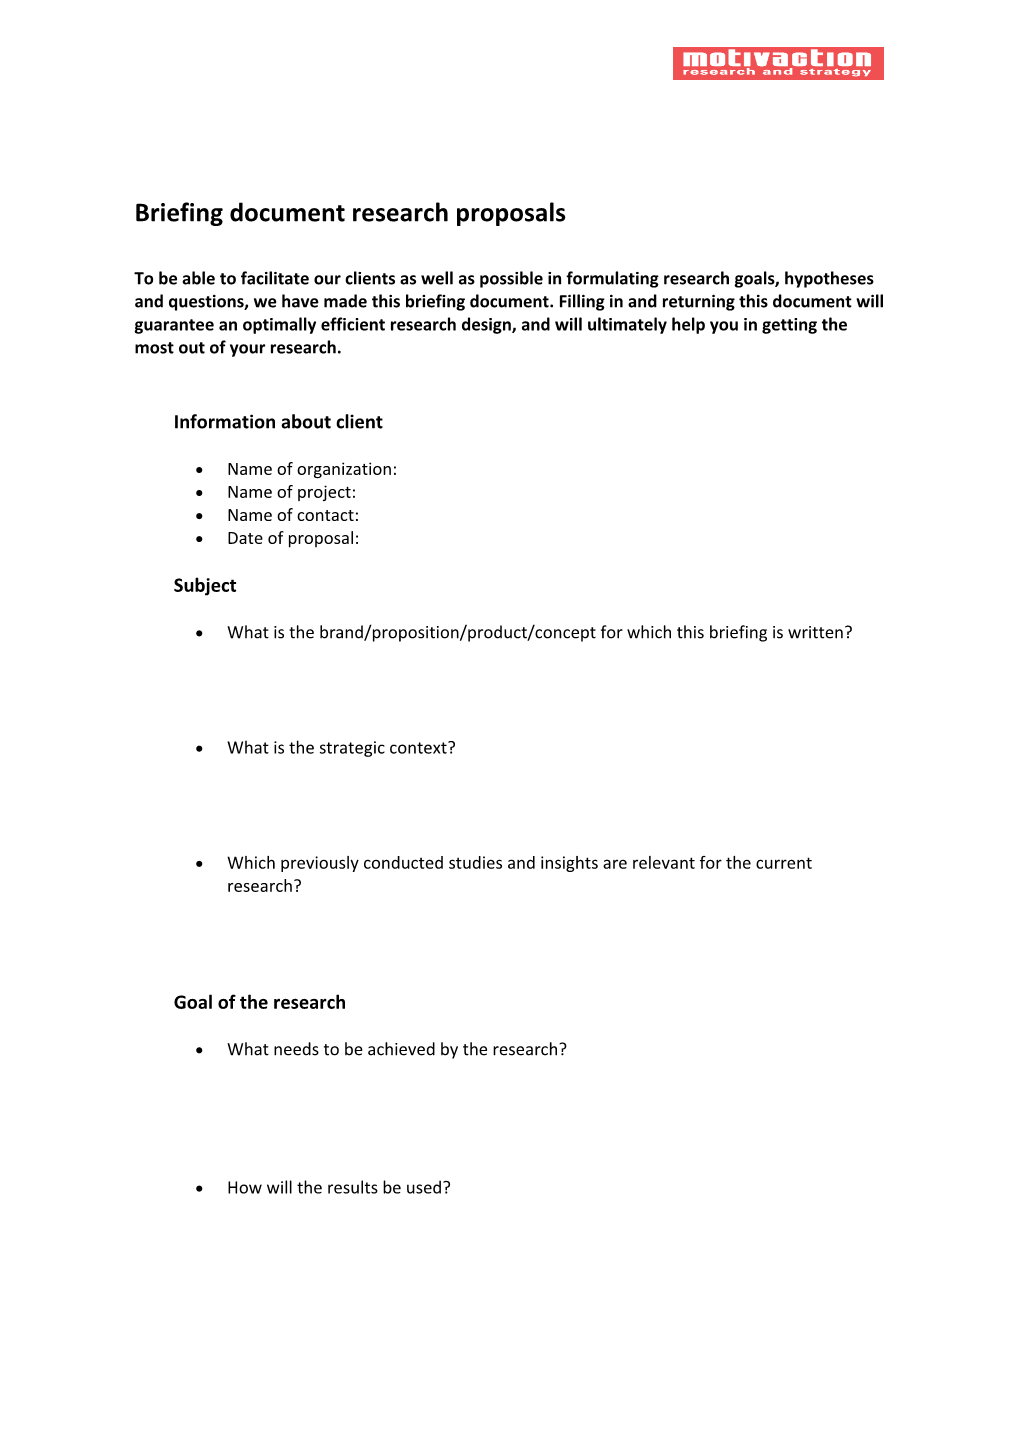 Briefing Document Research Proposals